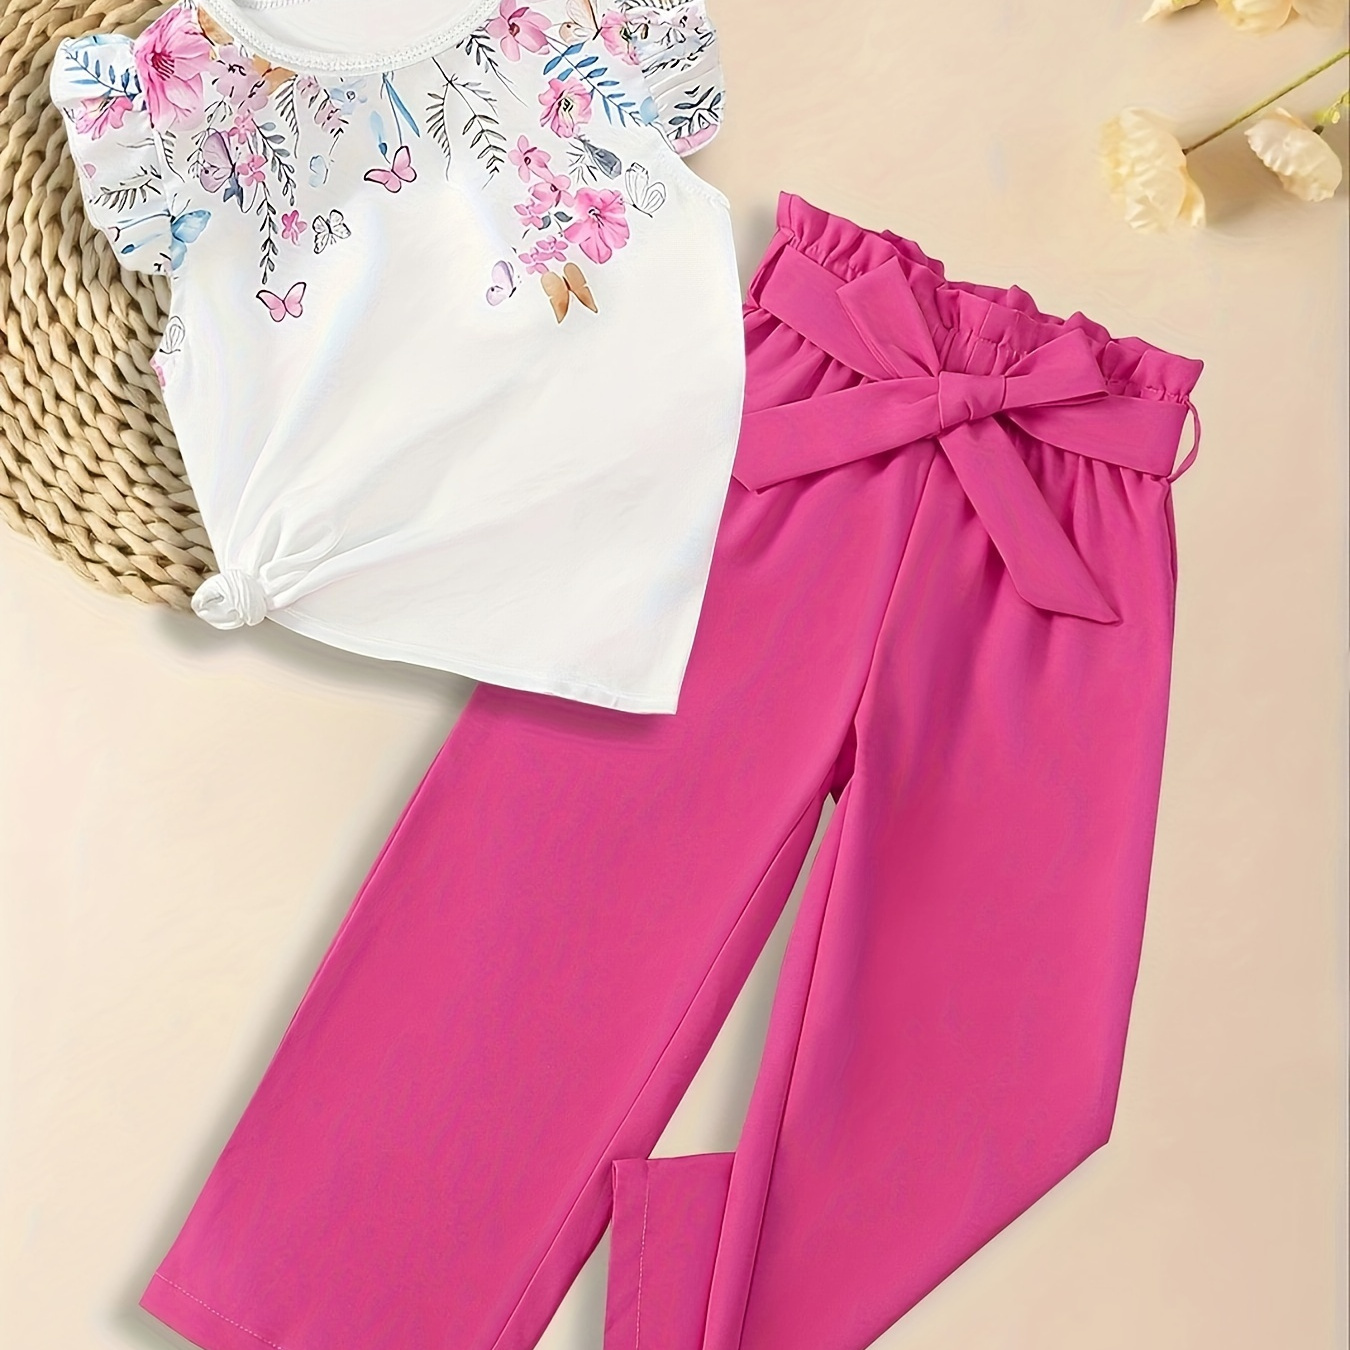 

Girls Outfit, Flowers Print Ruffle Top & High Waist Straight Pants Set Holiday Going Out 2pcs Summer Clothes